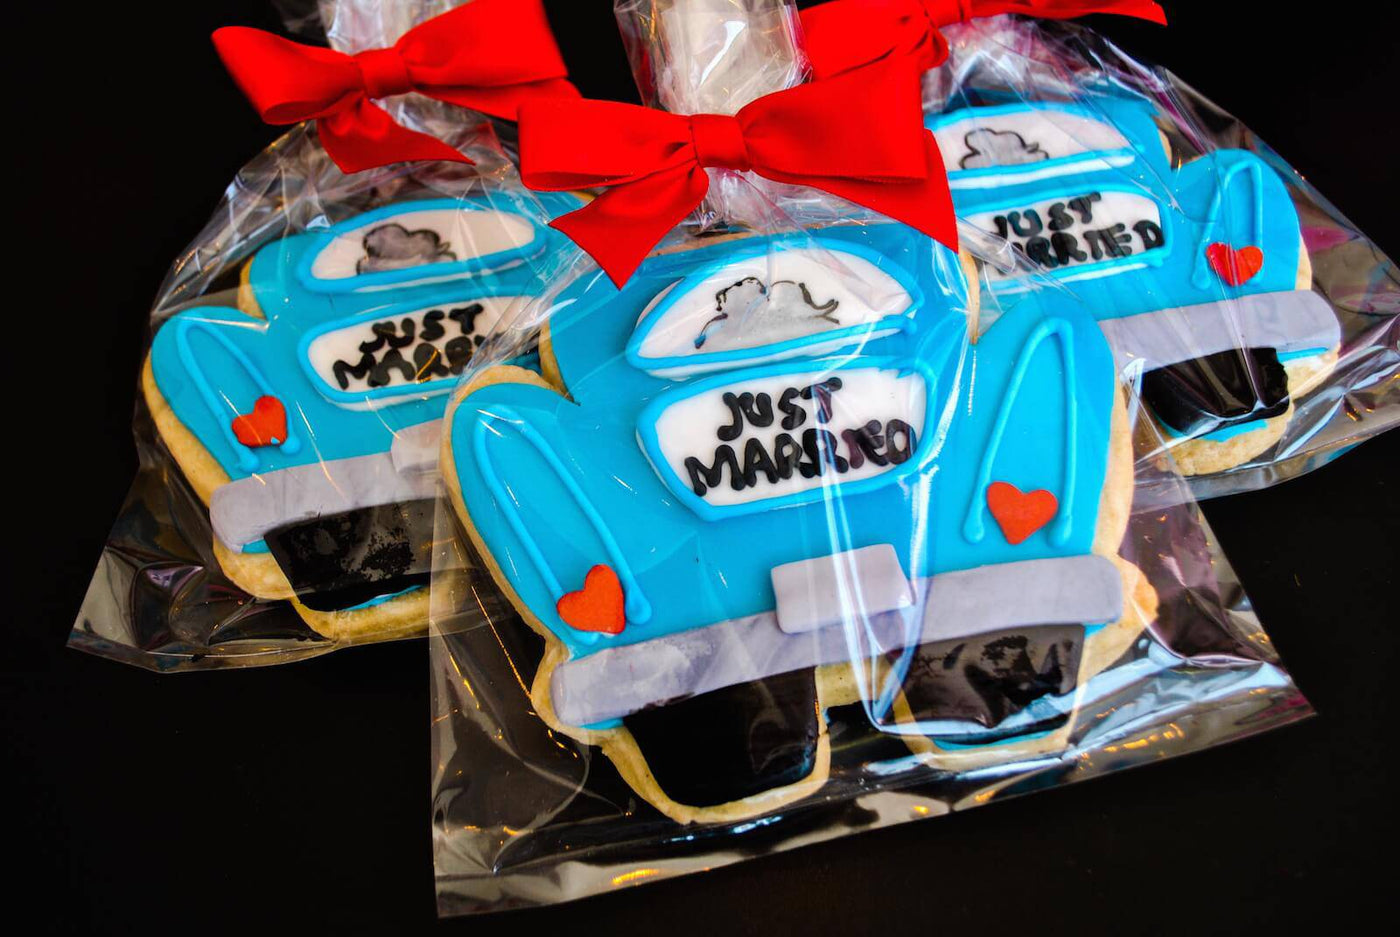 Just Married Cookies - Sweet E's Bake Shop